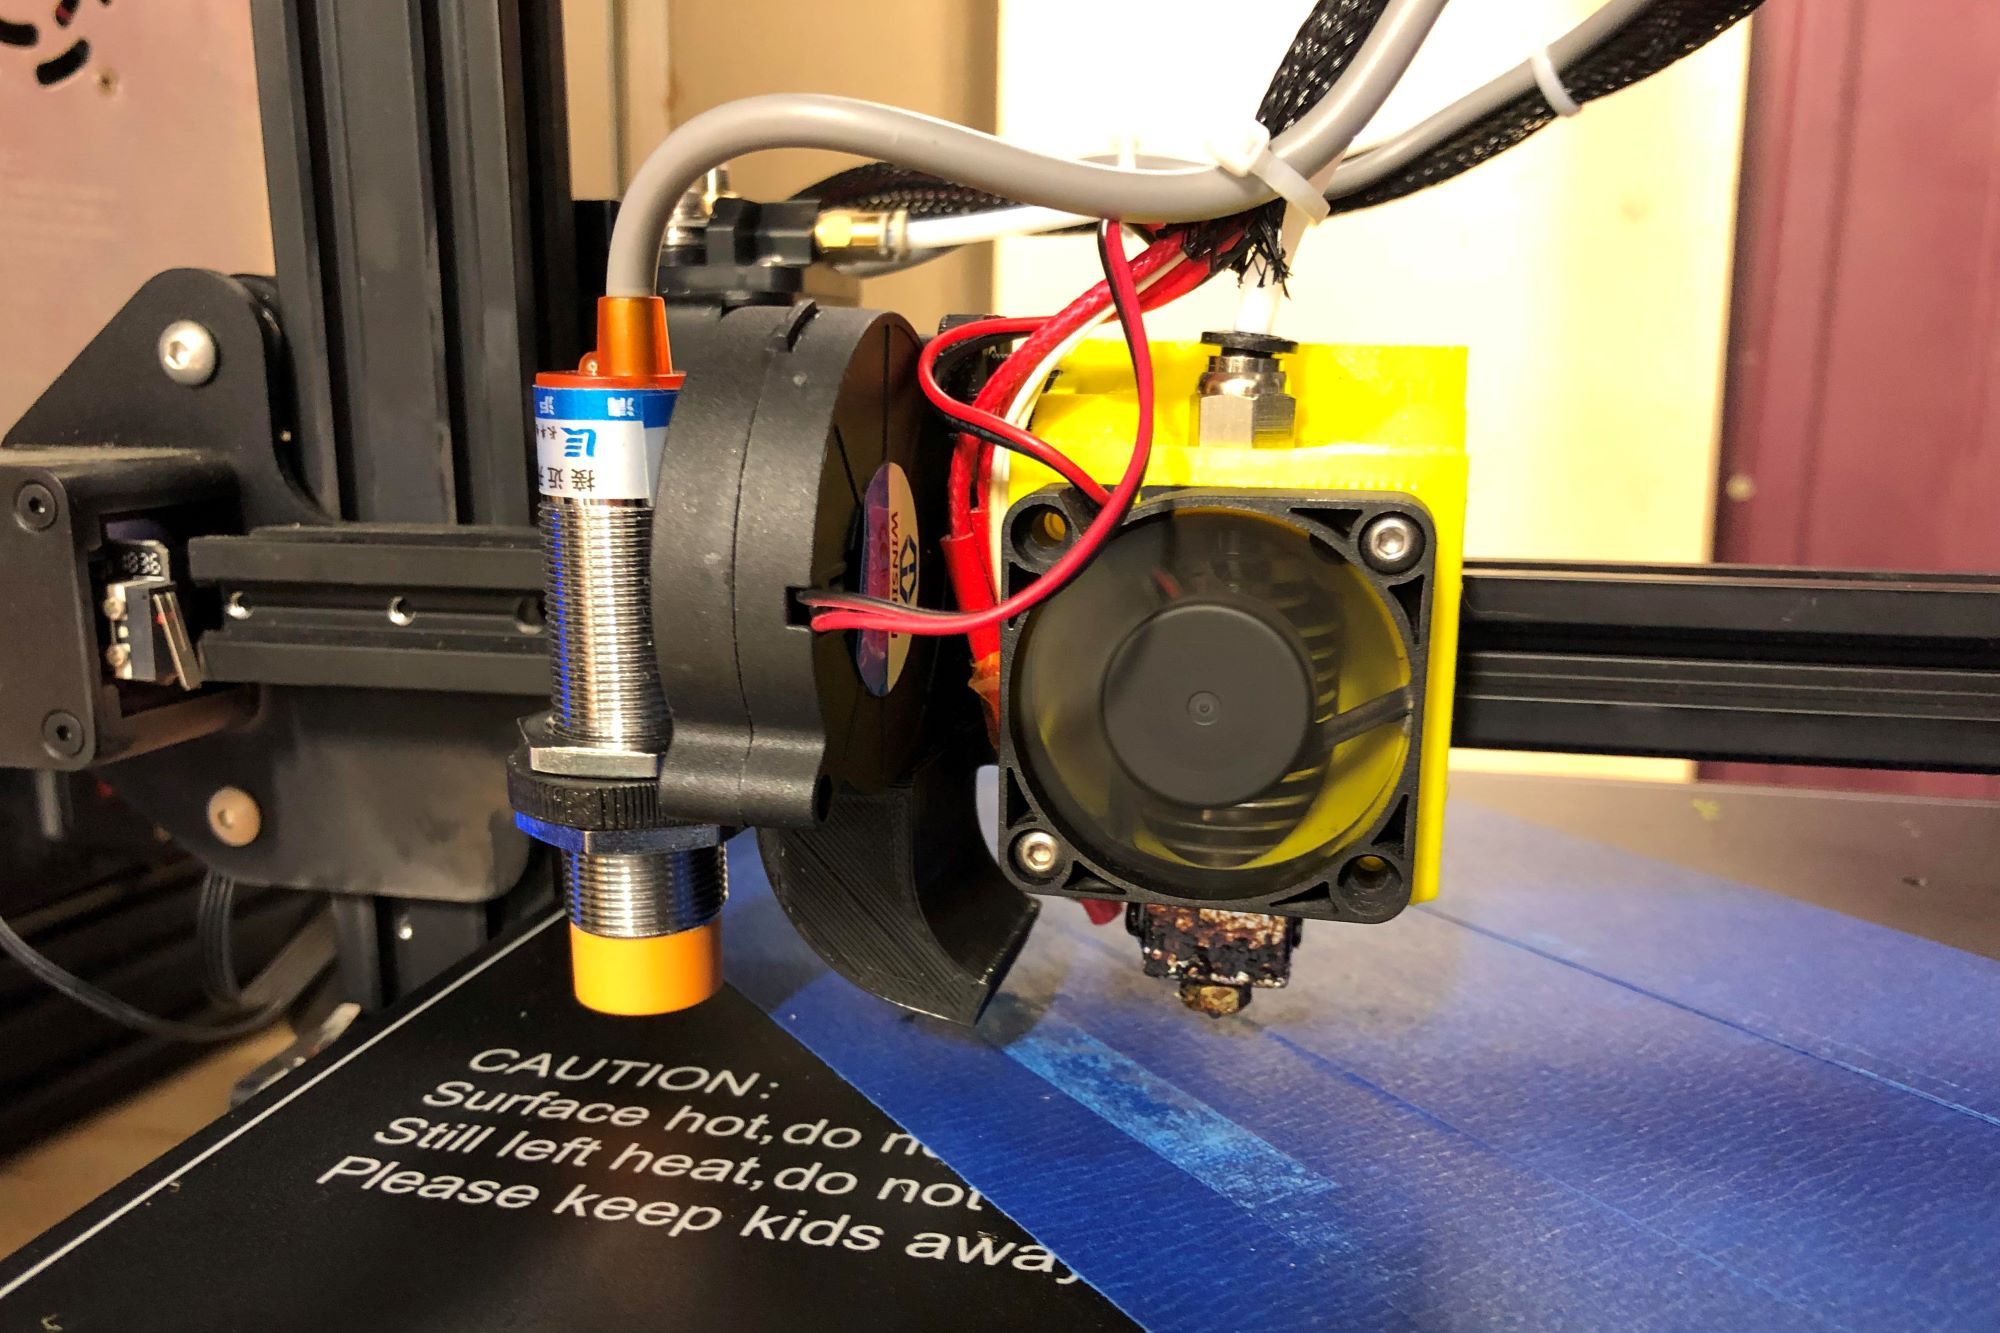 How Does Auto Leveling Work On A 3D Printer